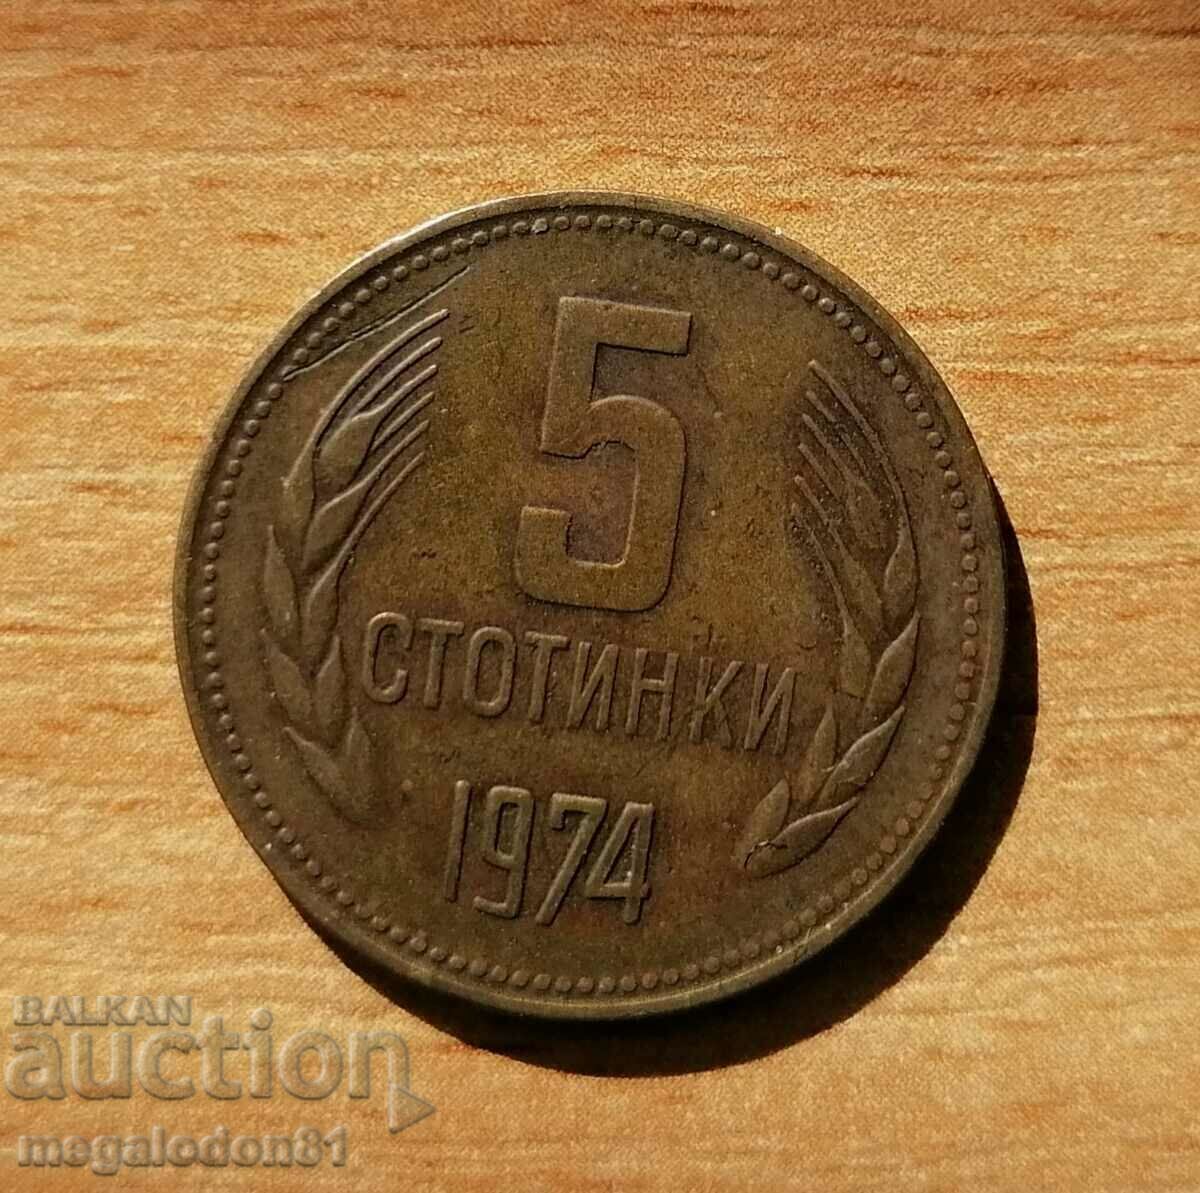 Bulgaria - 5 cents 1974, smooth cover